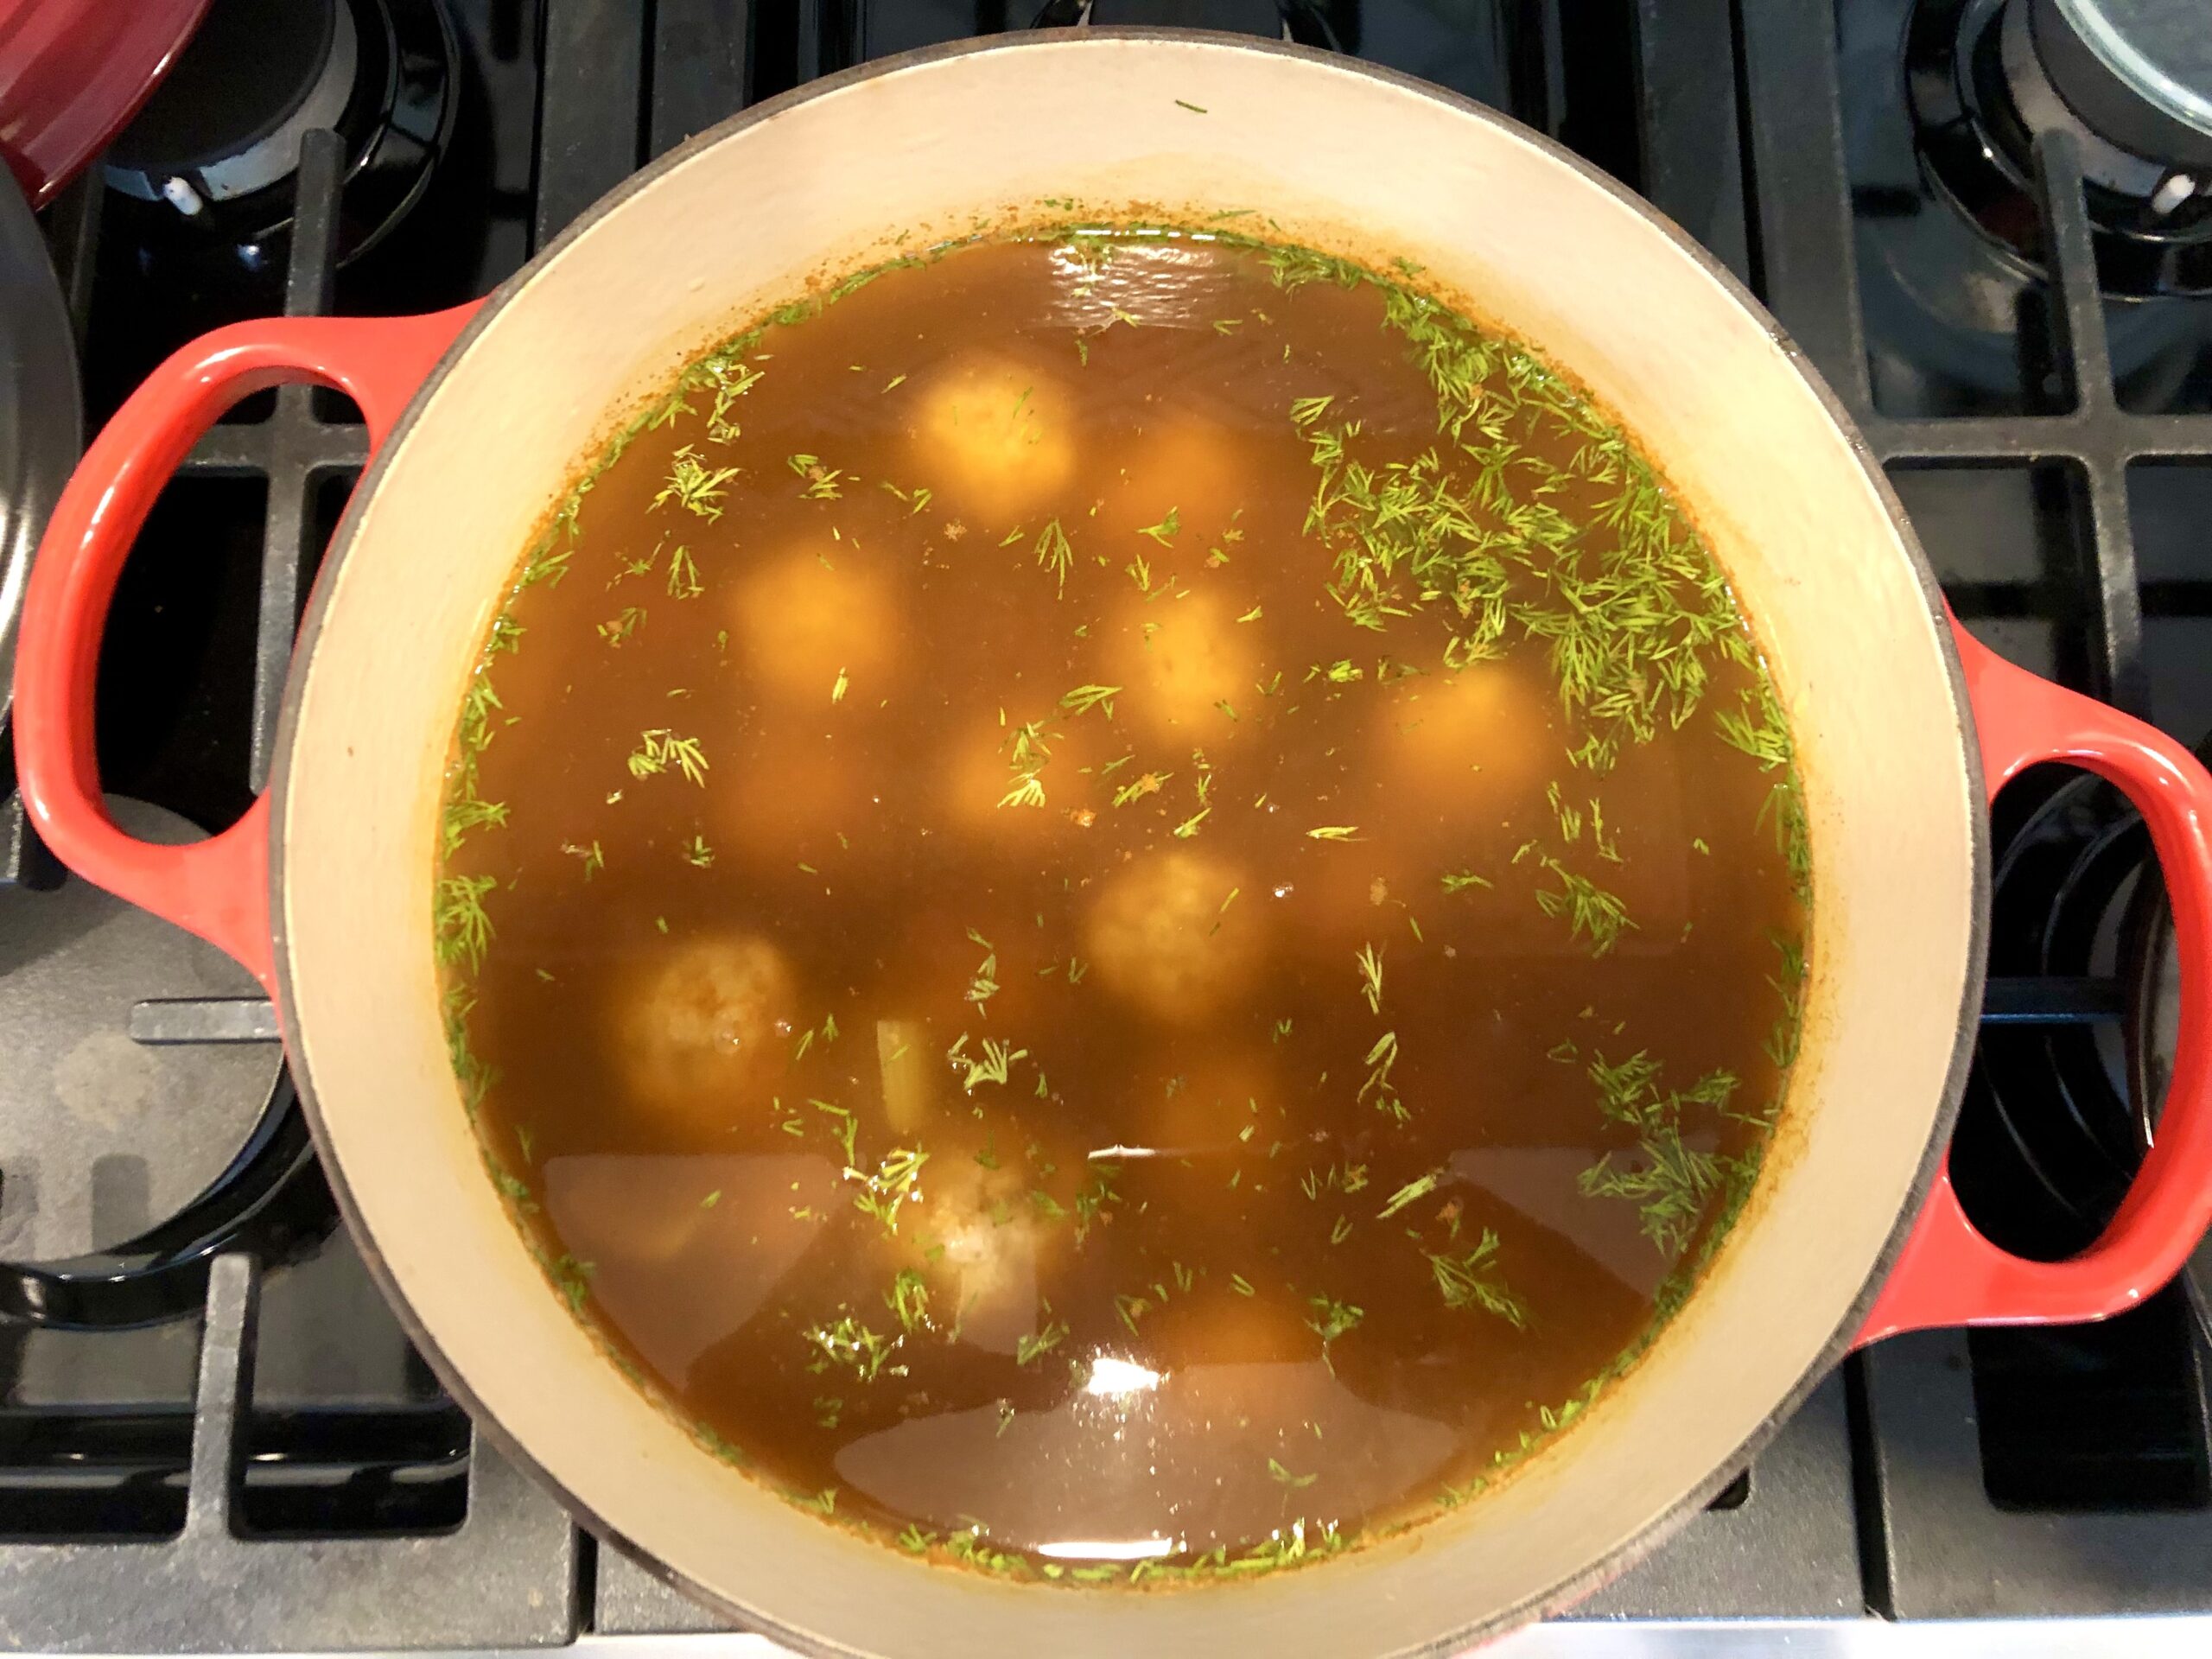 Pot of Matzo Ball soup on the stove. You can see the broth, matzo balls, and some dill